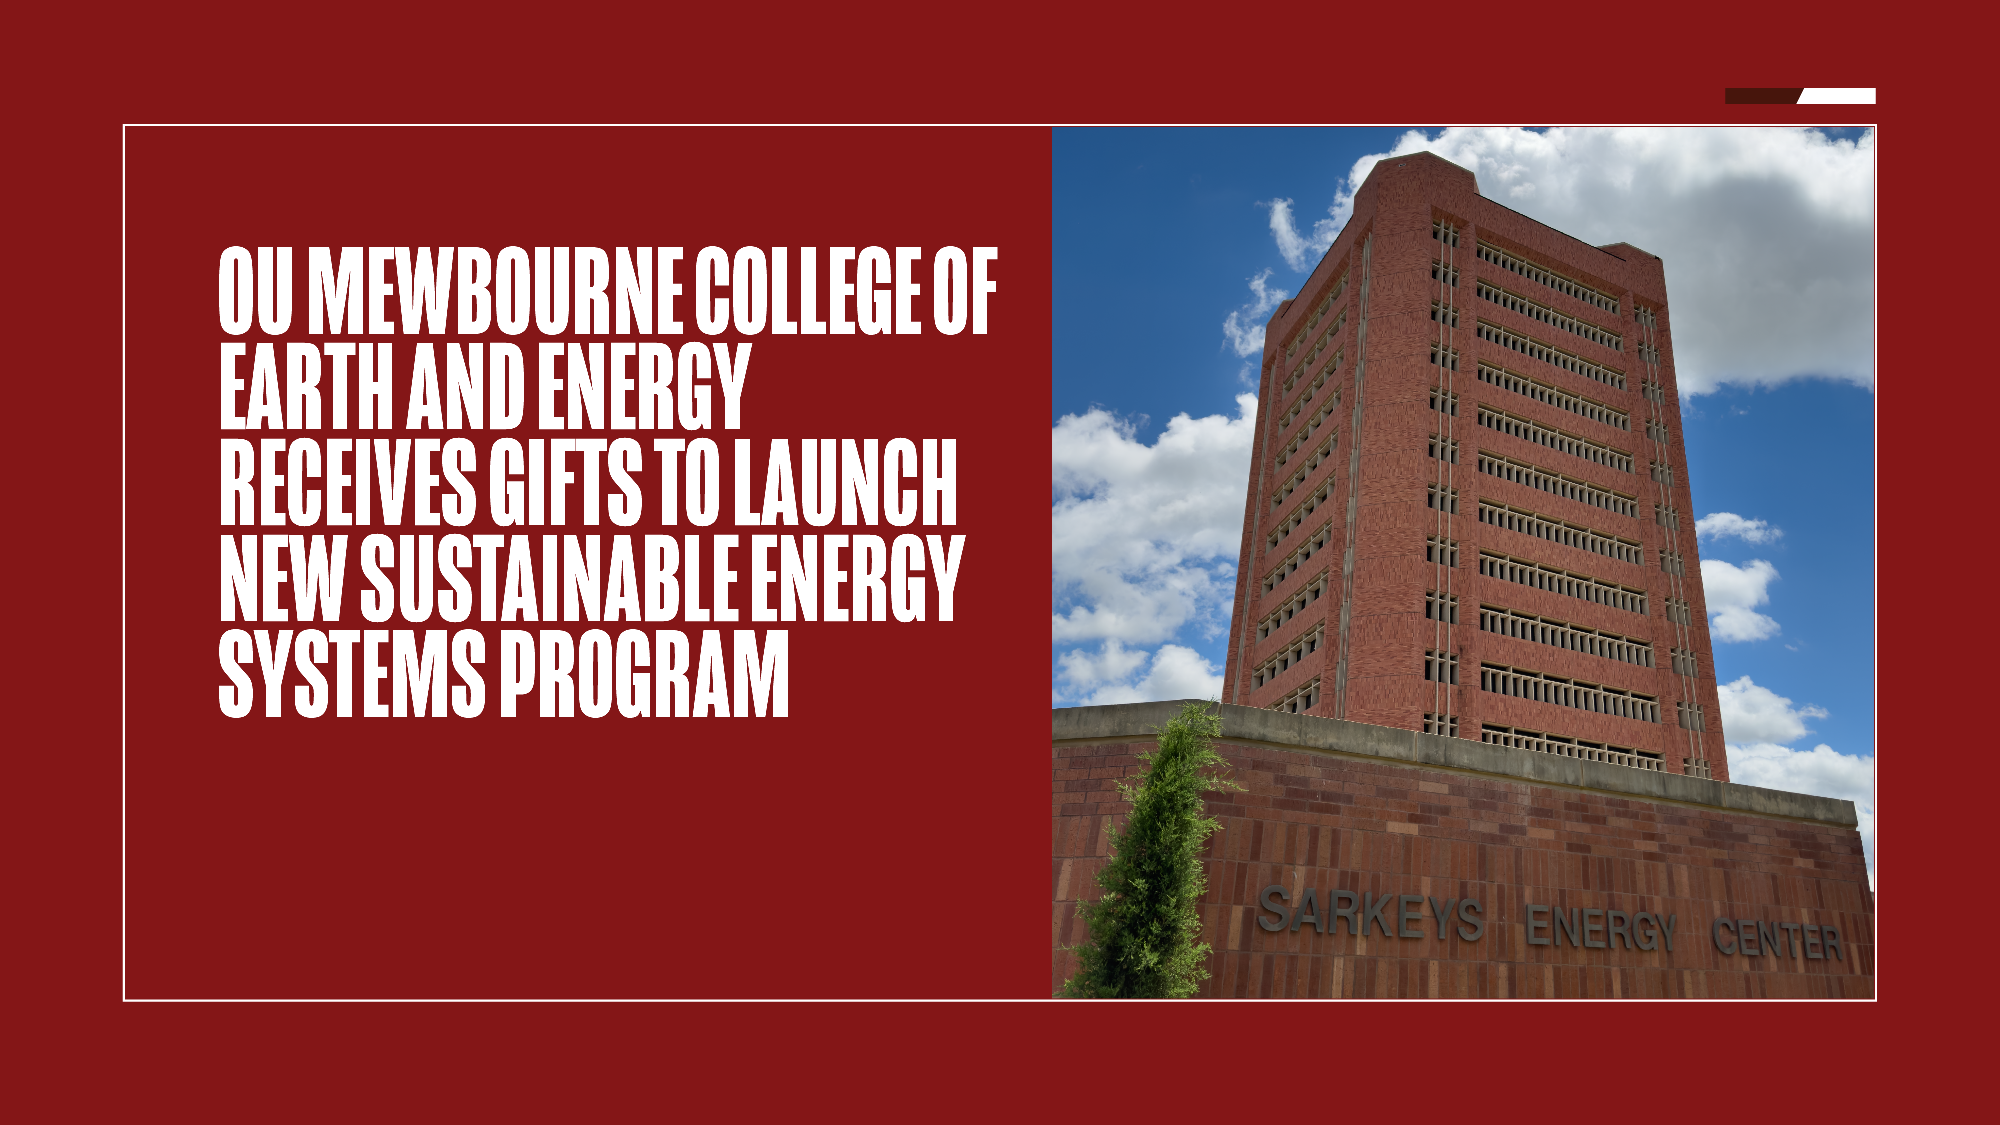 OU Mewbourne College Receives Gifts to Launch Sustainable Energy Systems Program